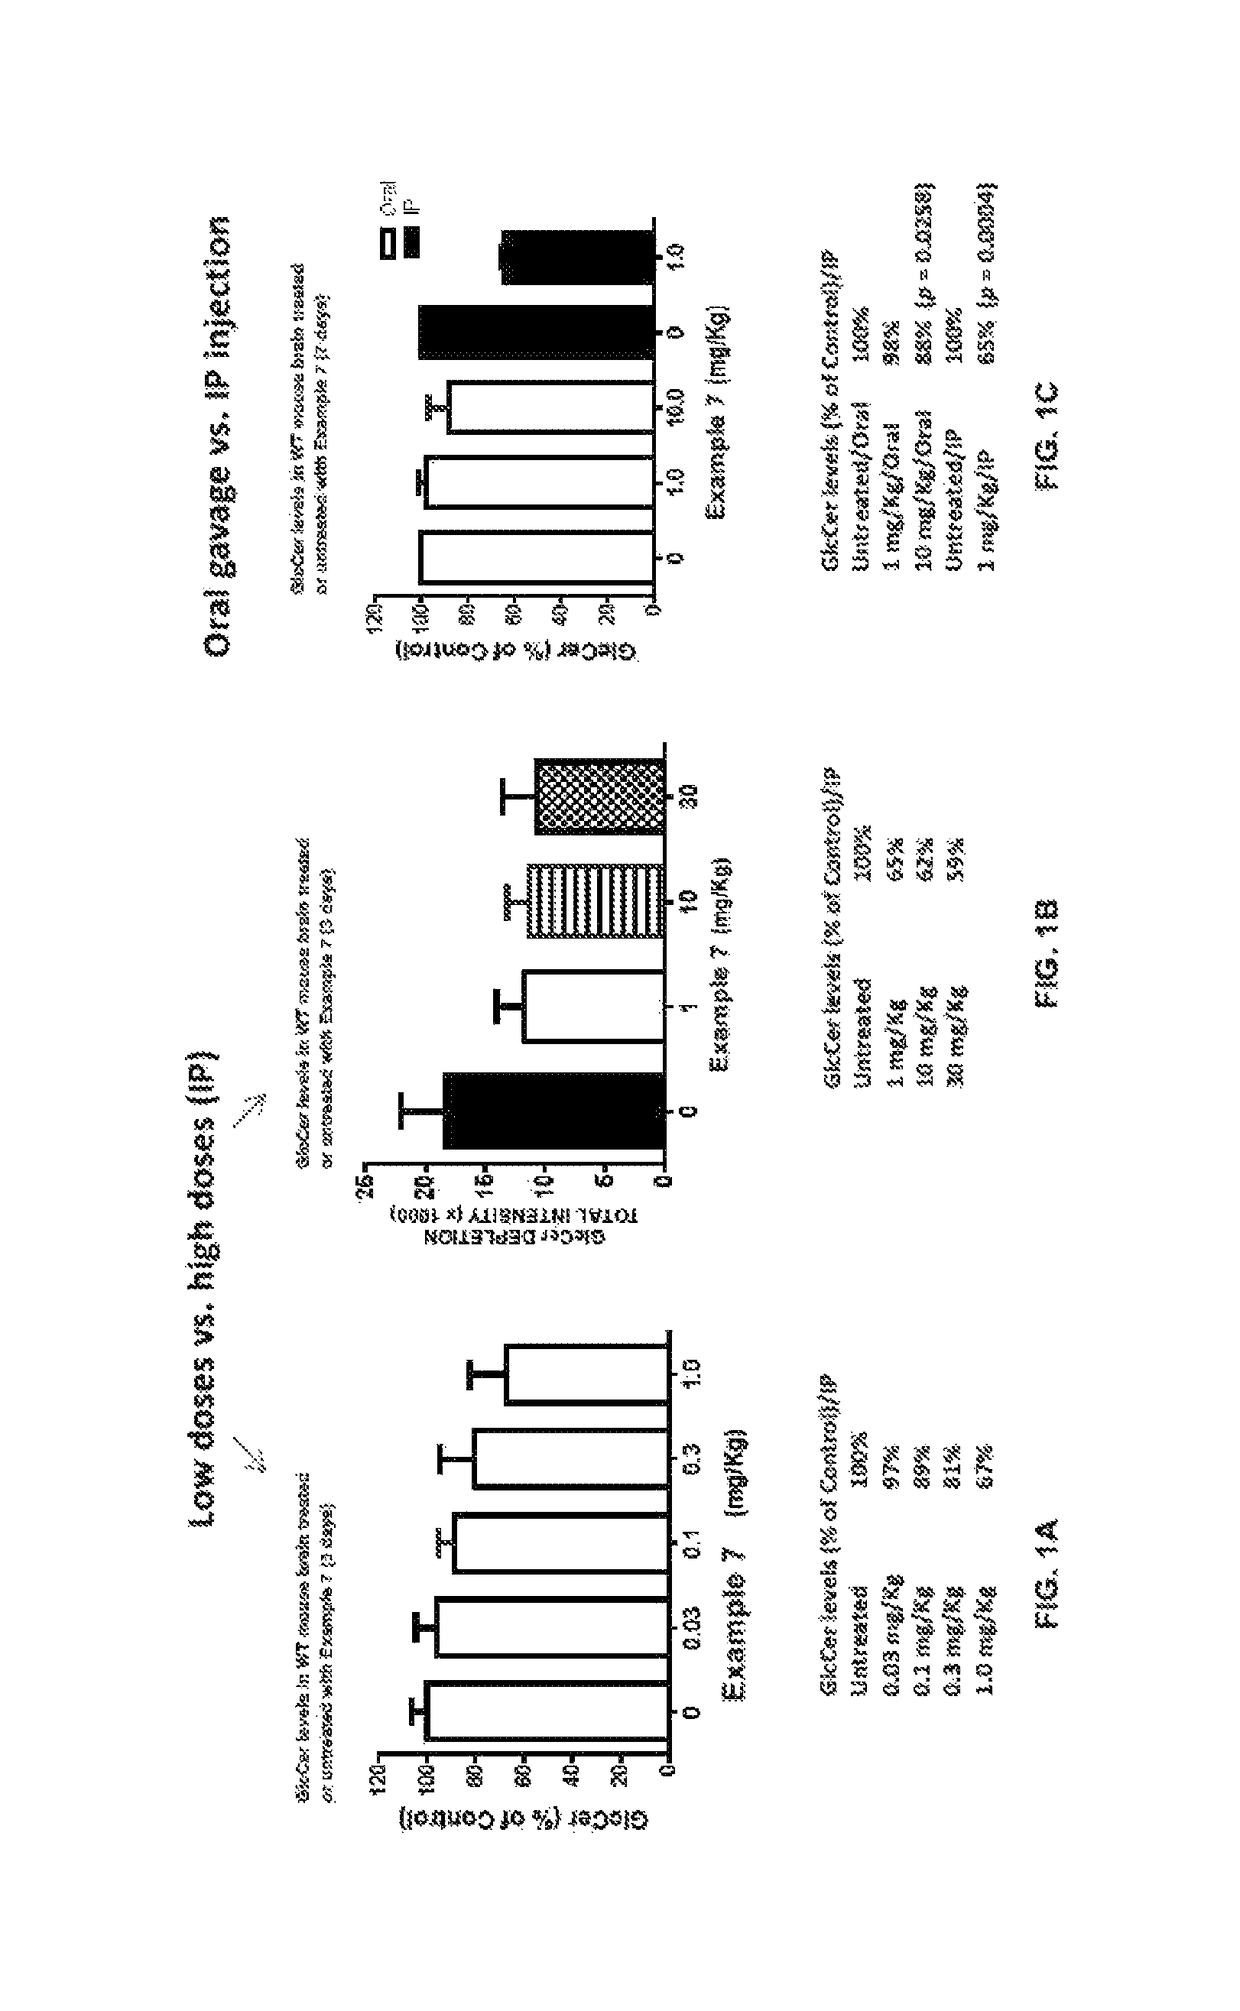 Glucosylceramide synthase inhibitors and therapeutic methods using the same